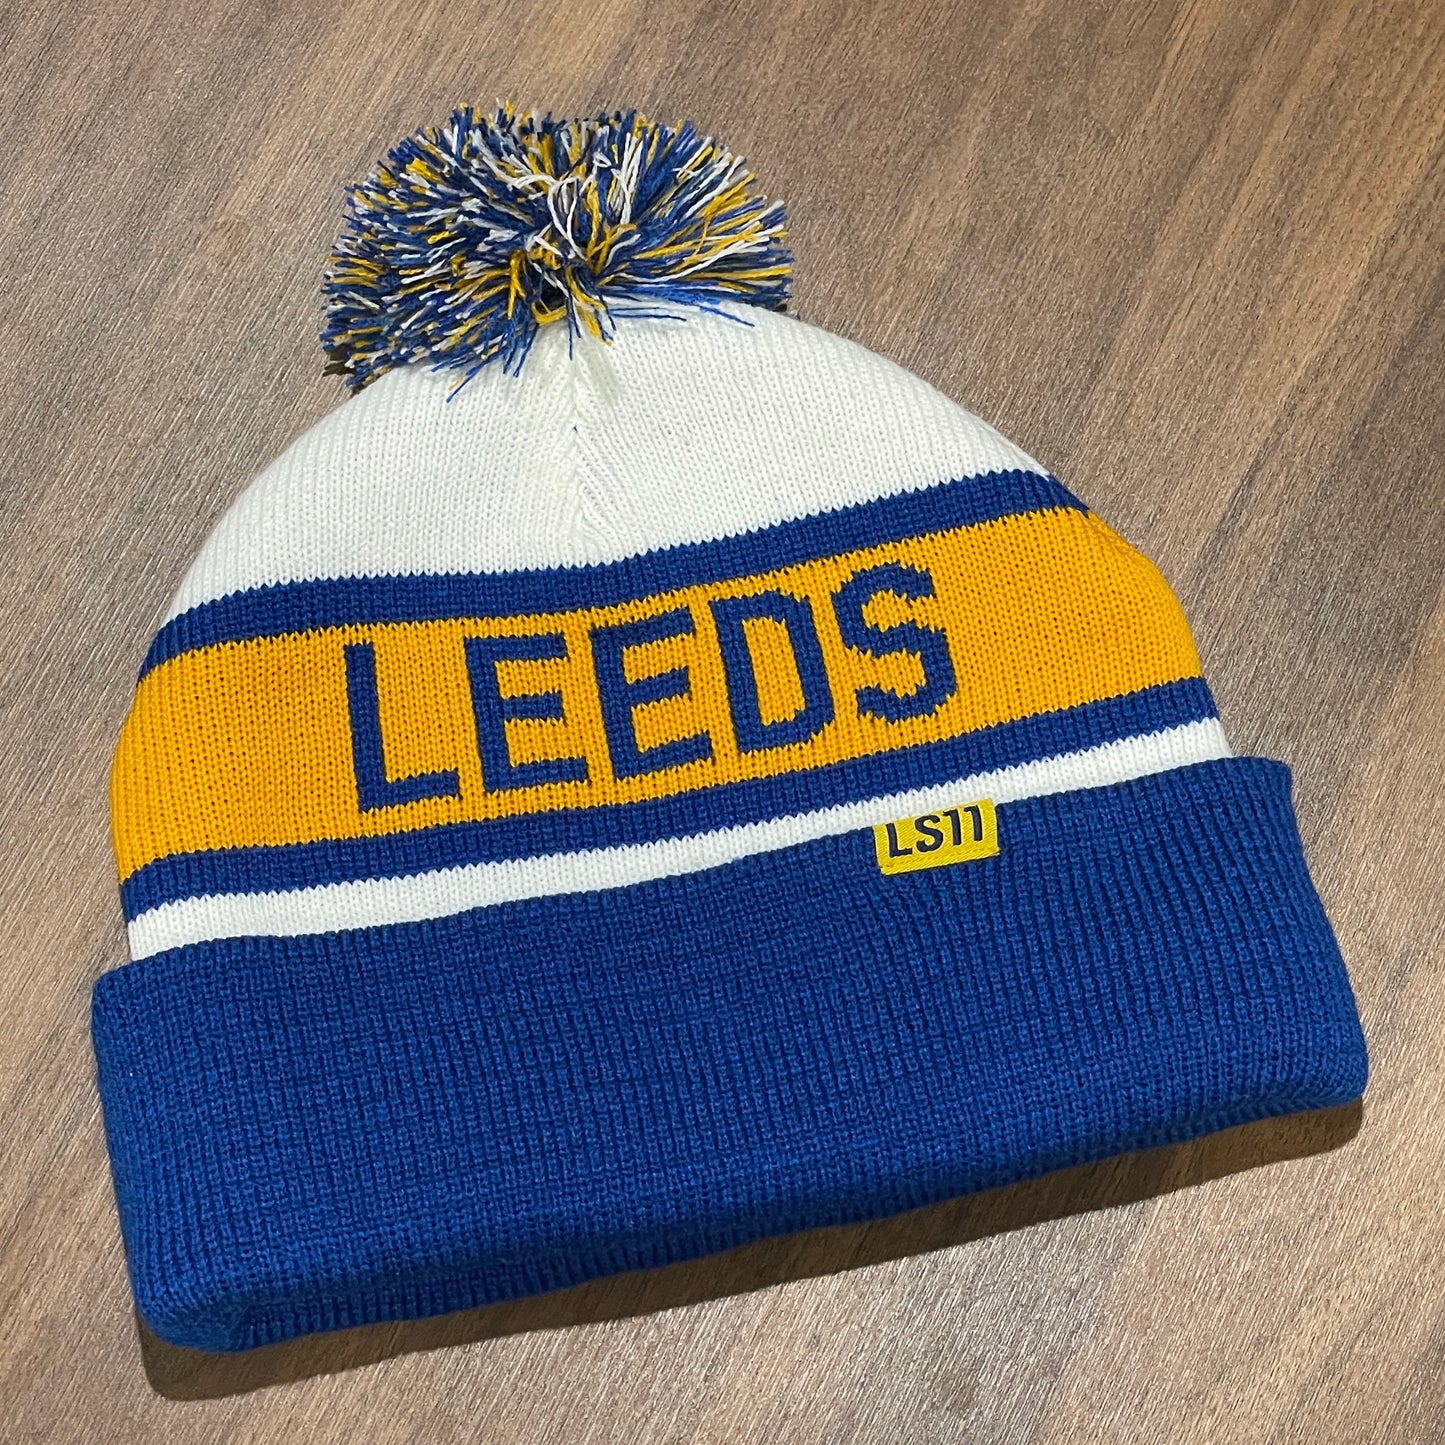 LS11 Winter Package Deal LUoodie & Bobble Hat!